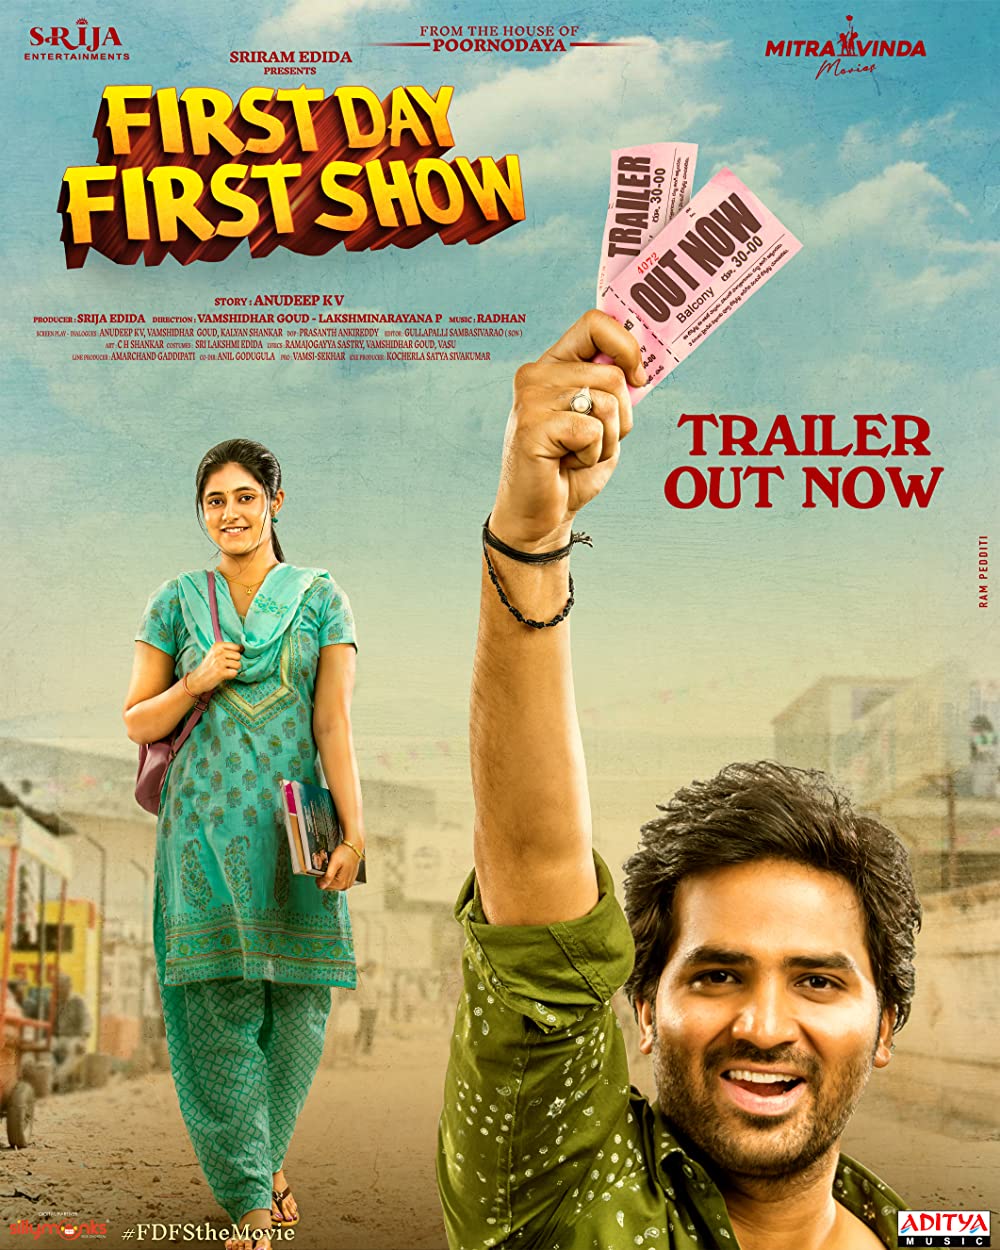 First Day First Show Movie (2022) Cast & Crew, Release Date, Story, Review, Poster, Trailer, Budget, Collection